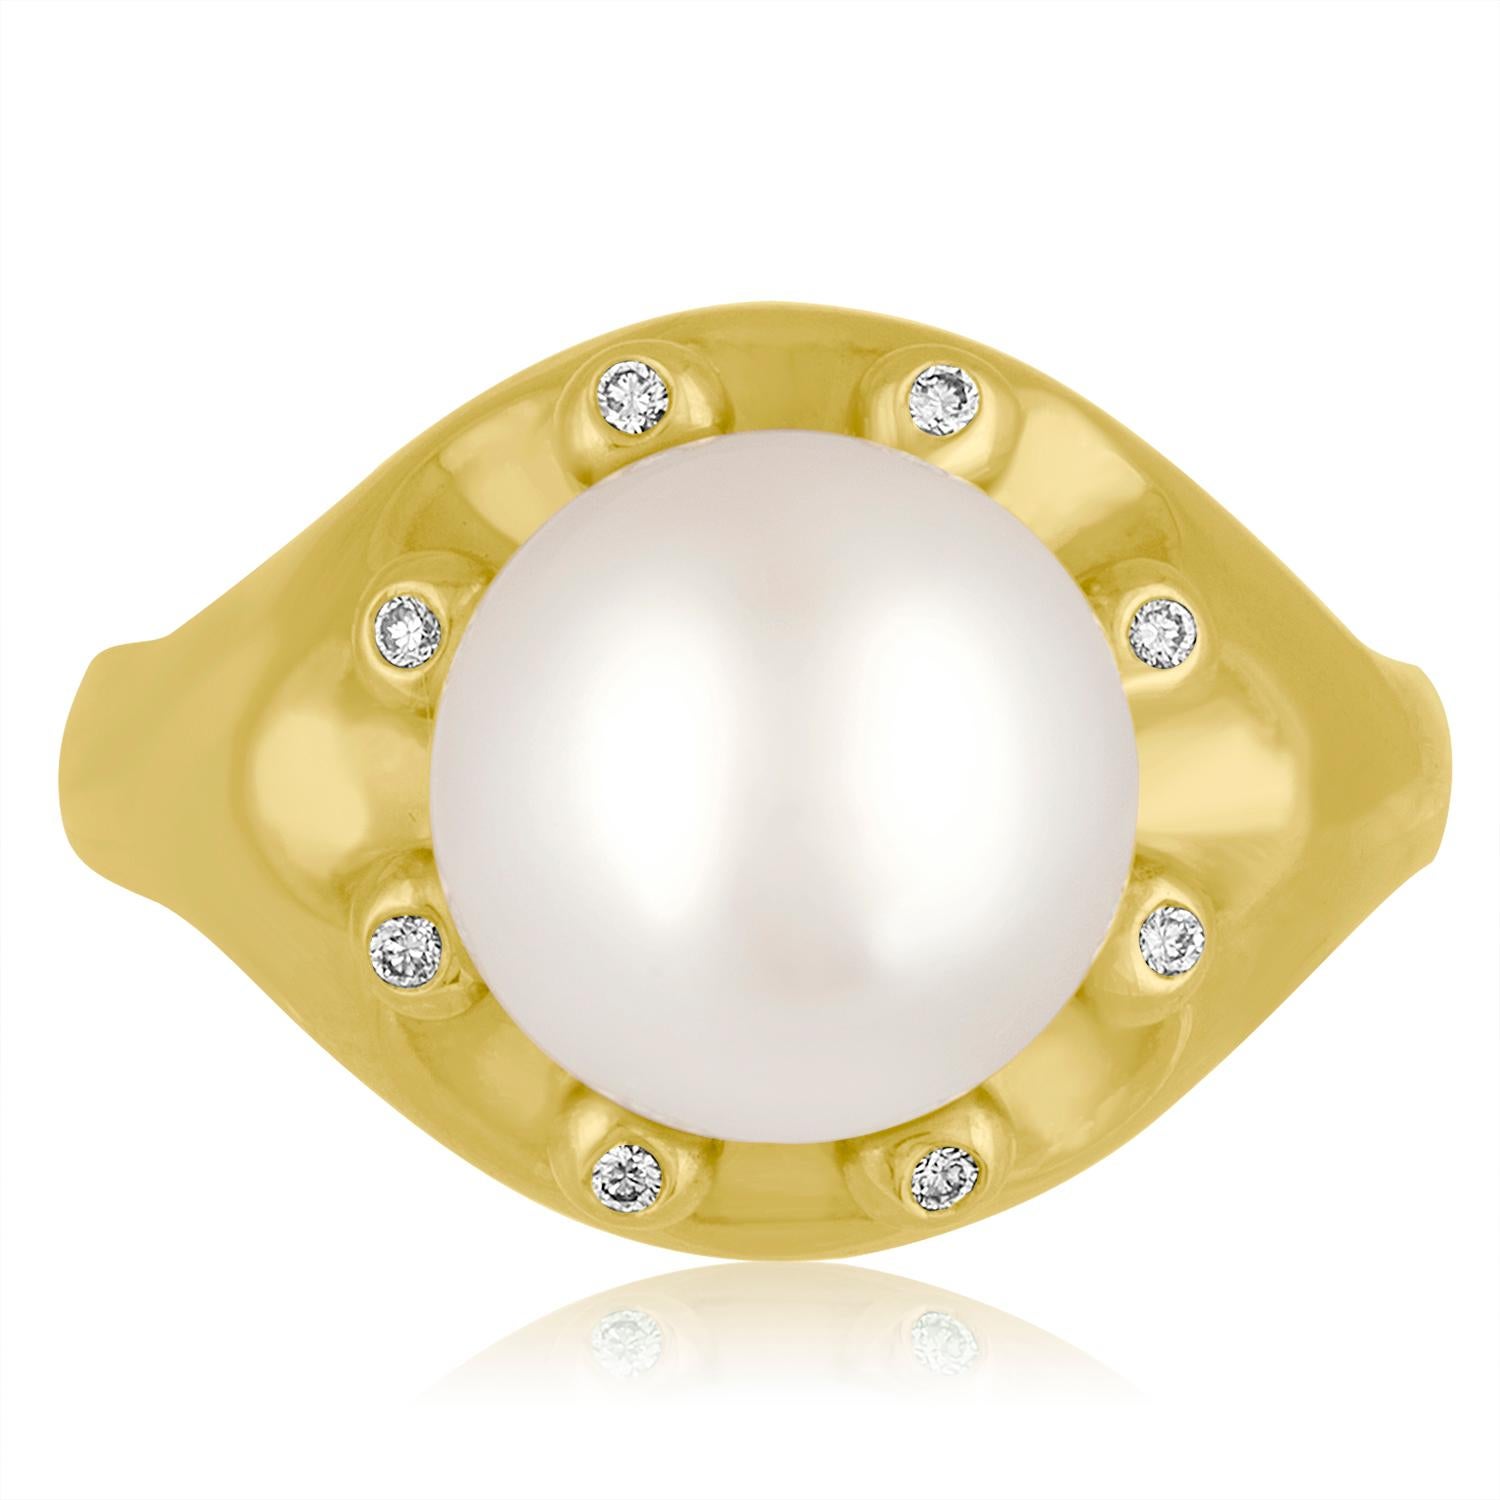 Beautiful Pearl Ring
The ring is 18K Yellow Gold
There are 0.05 Carats In Diamonds G VS
The pearl is a Cultured Fresh Water 9.6mm
The ring is a size 7, sizable
The ring weighs 8.8 grams.